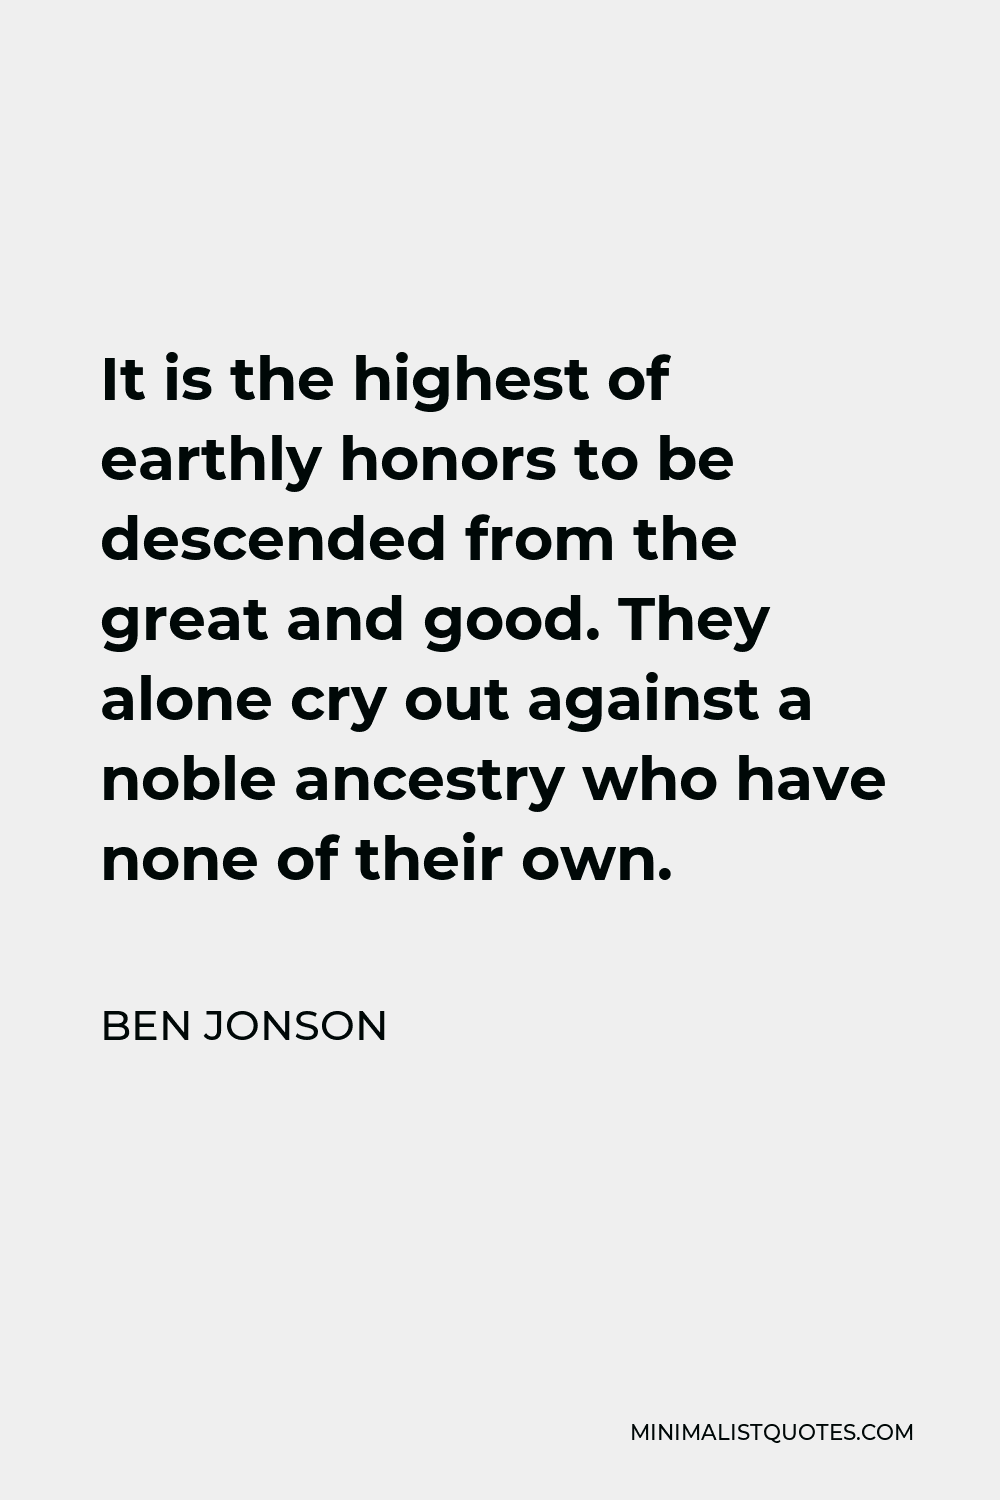 Ben Jonson Quote - It is the highest of earthly honors to be descended from the great and good. They alone cry out against a noble ancestry who have none of their own.